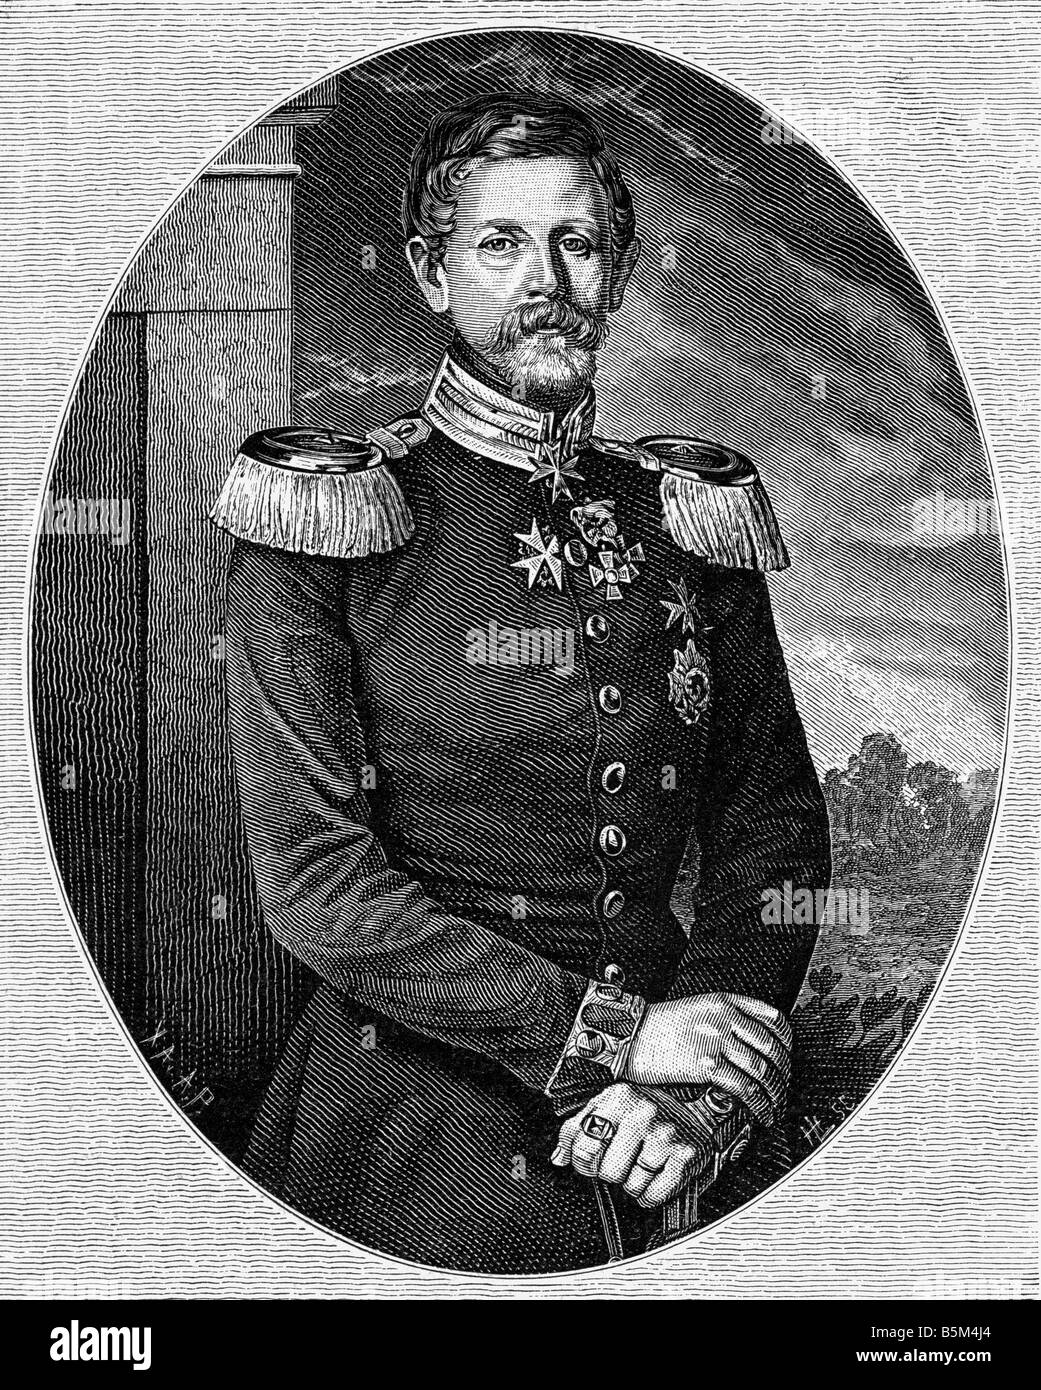 Moltke, Helmuth Karl von, 26.10.1800 - 24.4.1891, Prussian general, half length, wood engraving after painting, 1851, , Stock Photo